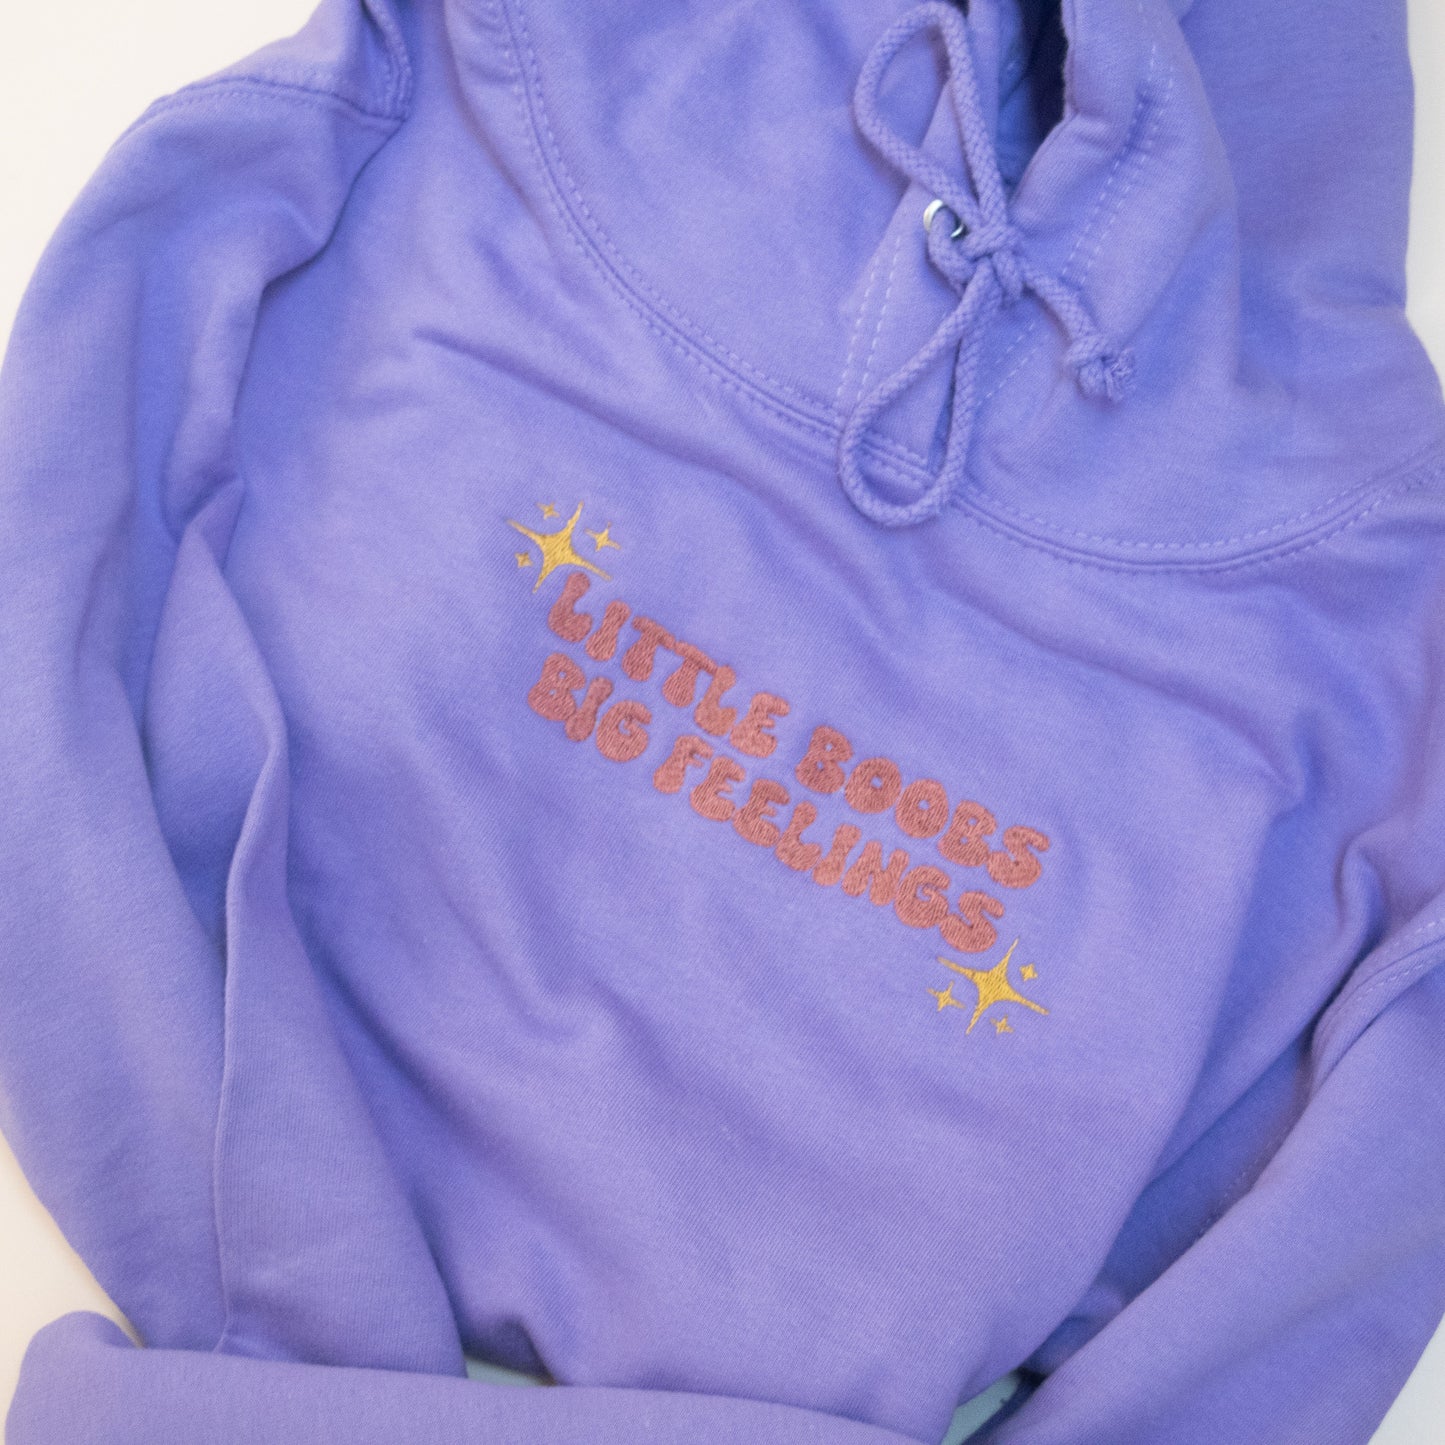 👩‍❤️‍💋‍👩Embrace the A-Cup Adventure: 'Small Boobs, Big Feelings' Embroidered Hoodie